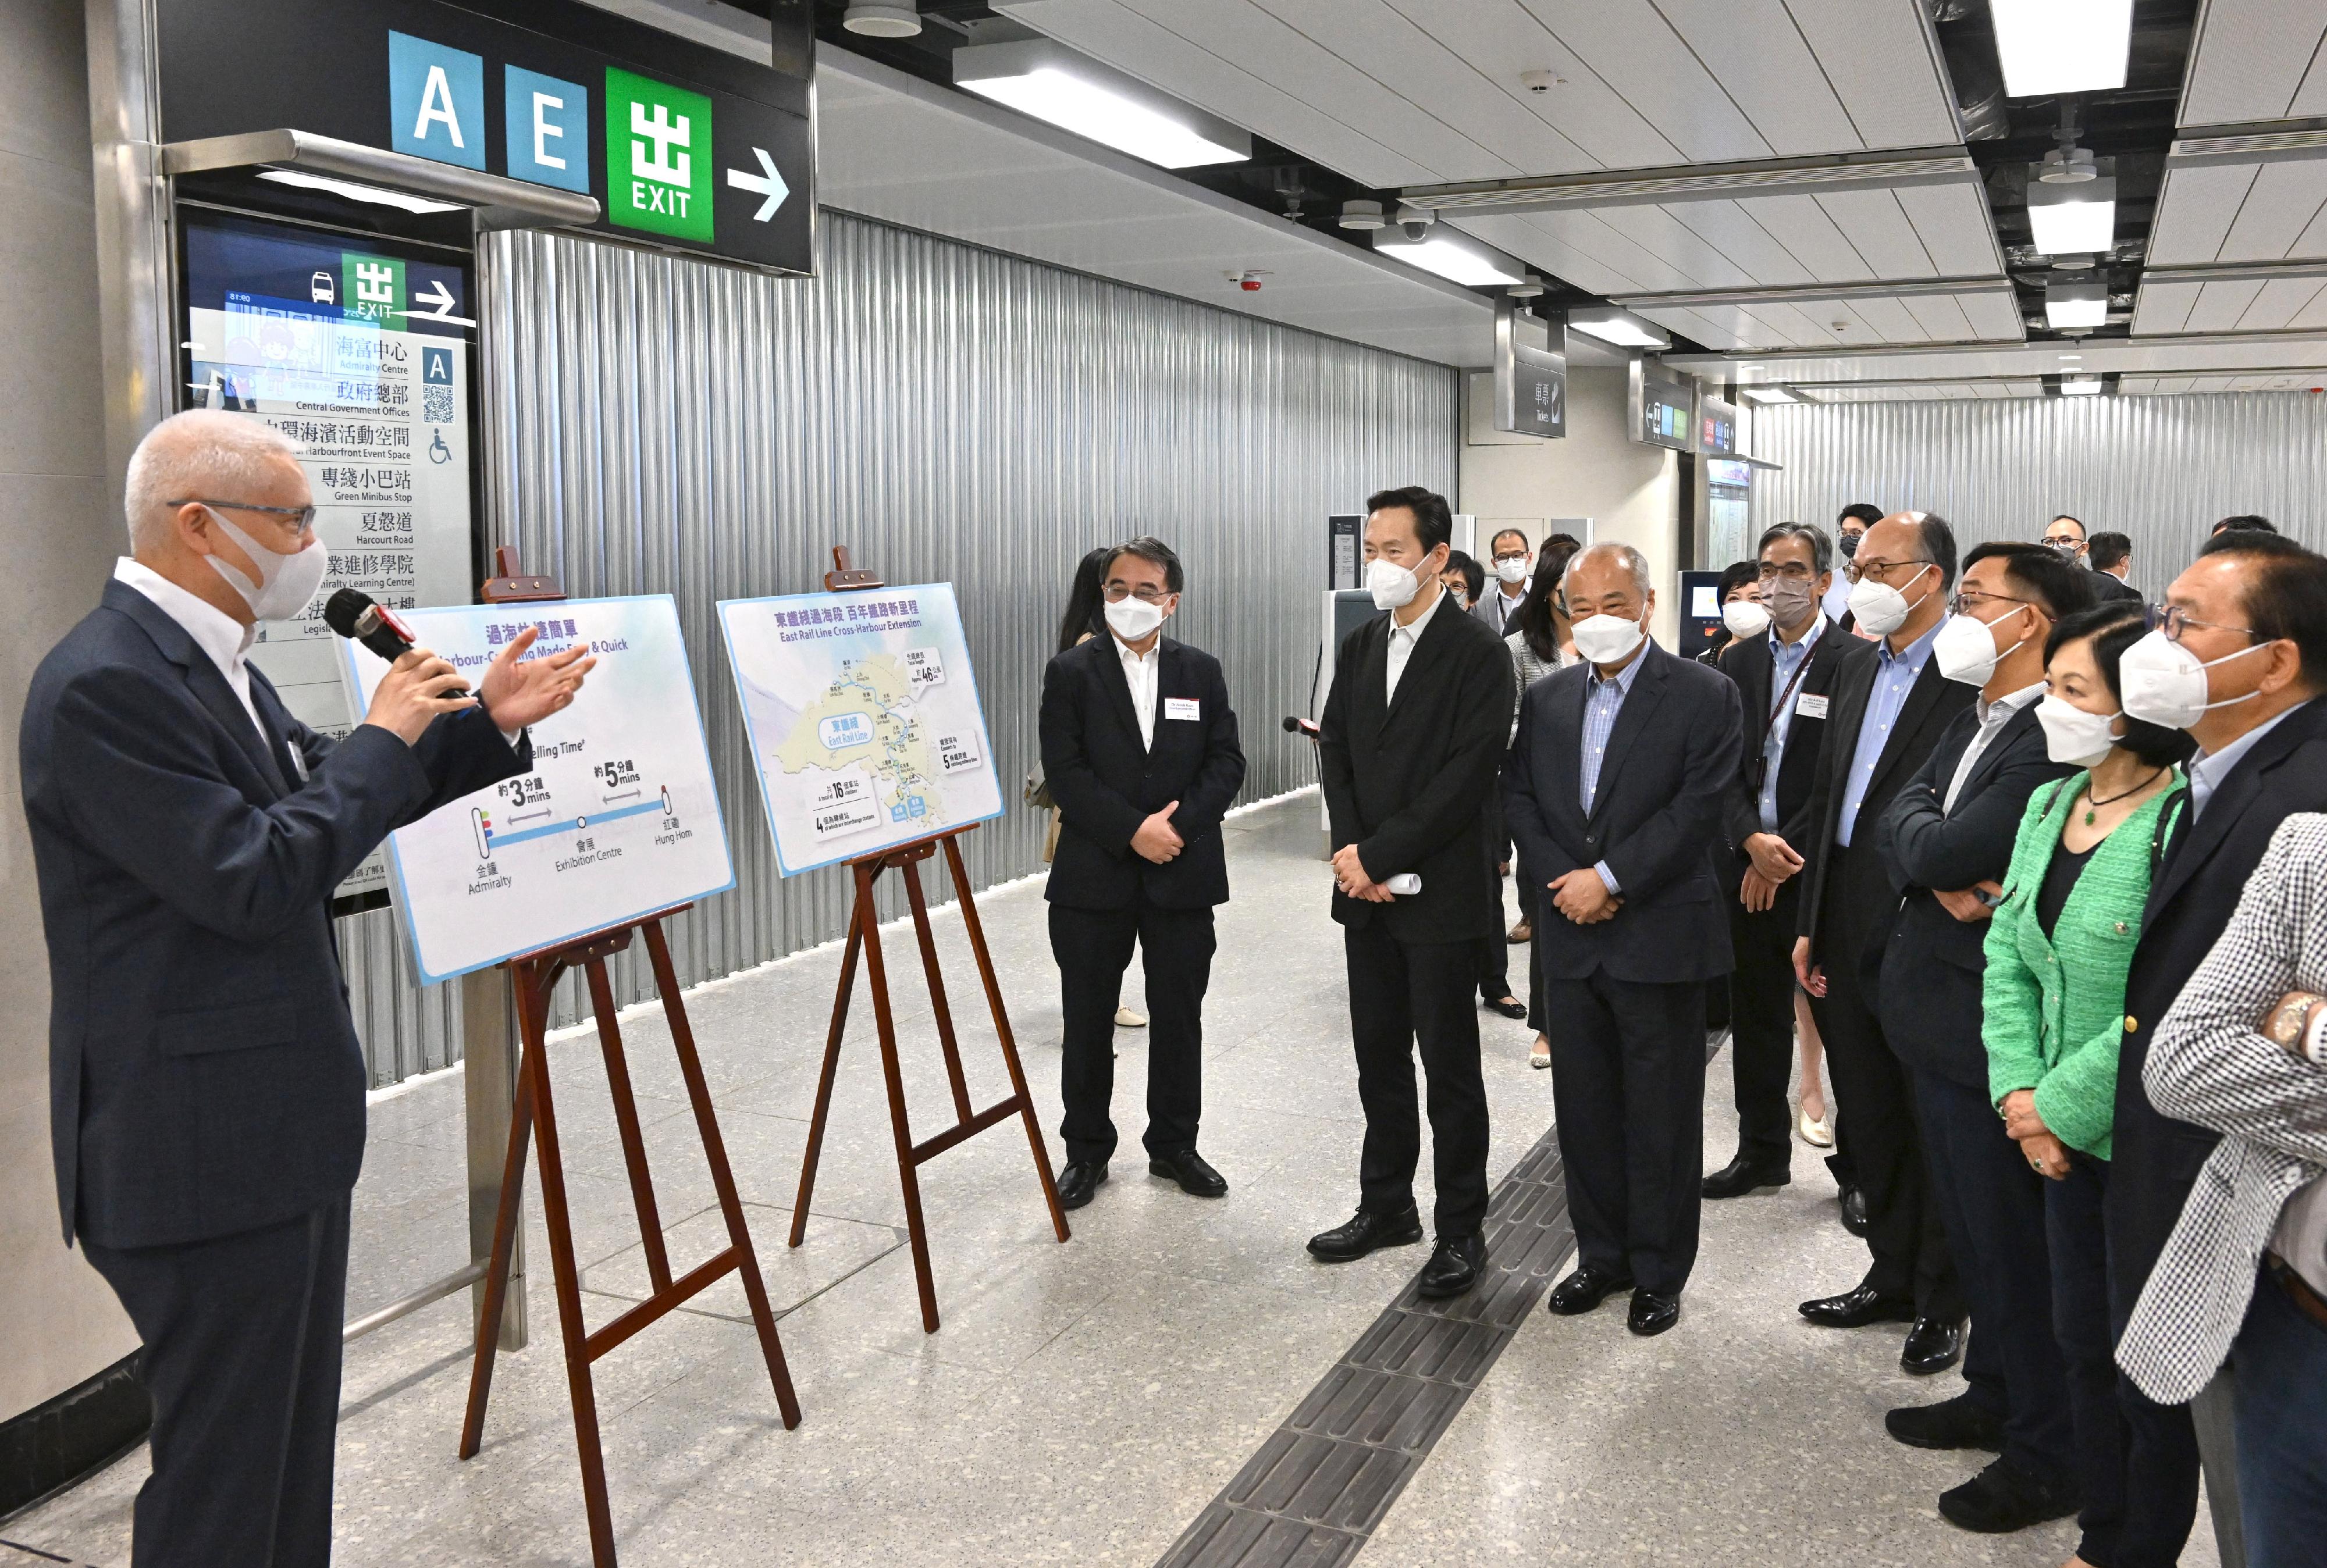 Non-official Members of the Executive Council (ExCo Non-official Members) today (May 5) visited the stations of the East Rail Line cross-harbour extension. Photo shows the ExCo Non-official Members, accompanied by the Secretary for Transport and Housing, Mr Frank Chan Fan (fourth right), being briefed by the Chairman of the MTR Corporation Limited, Dr Rex Auyeung (first left), on the East Rail Line cross-harbour extension project at the extension part of Admiralty Station.